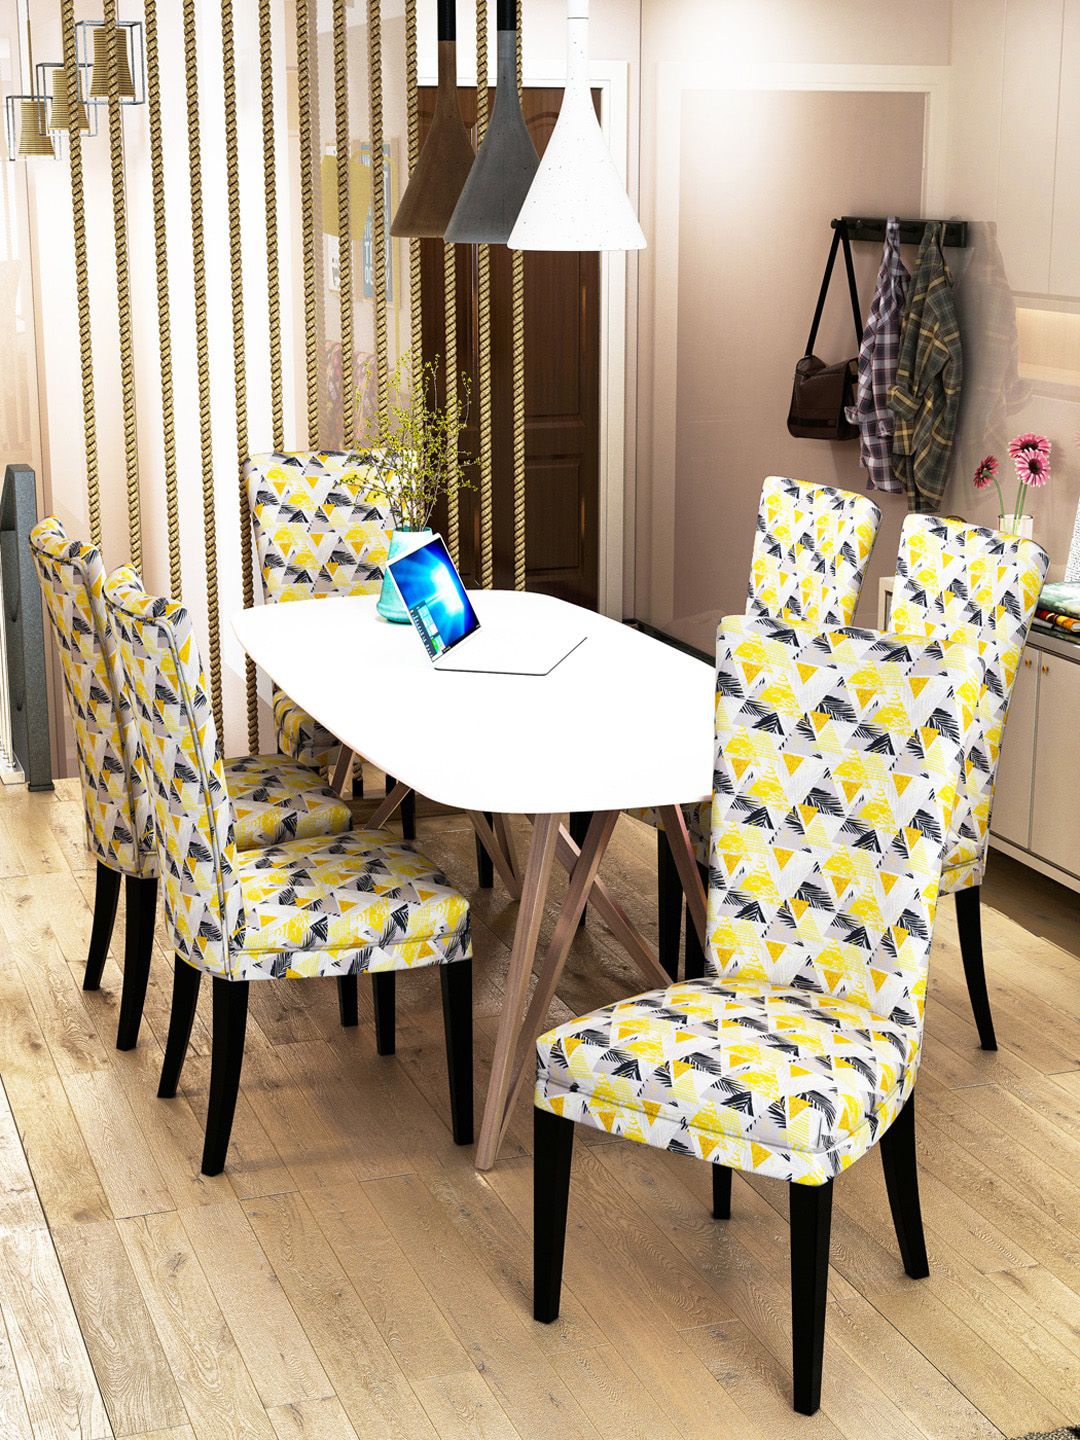 Nendle Set Of 6 Printed Stretchable Dining Table Chair Covers Price in India